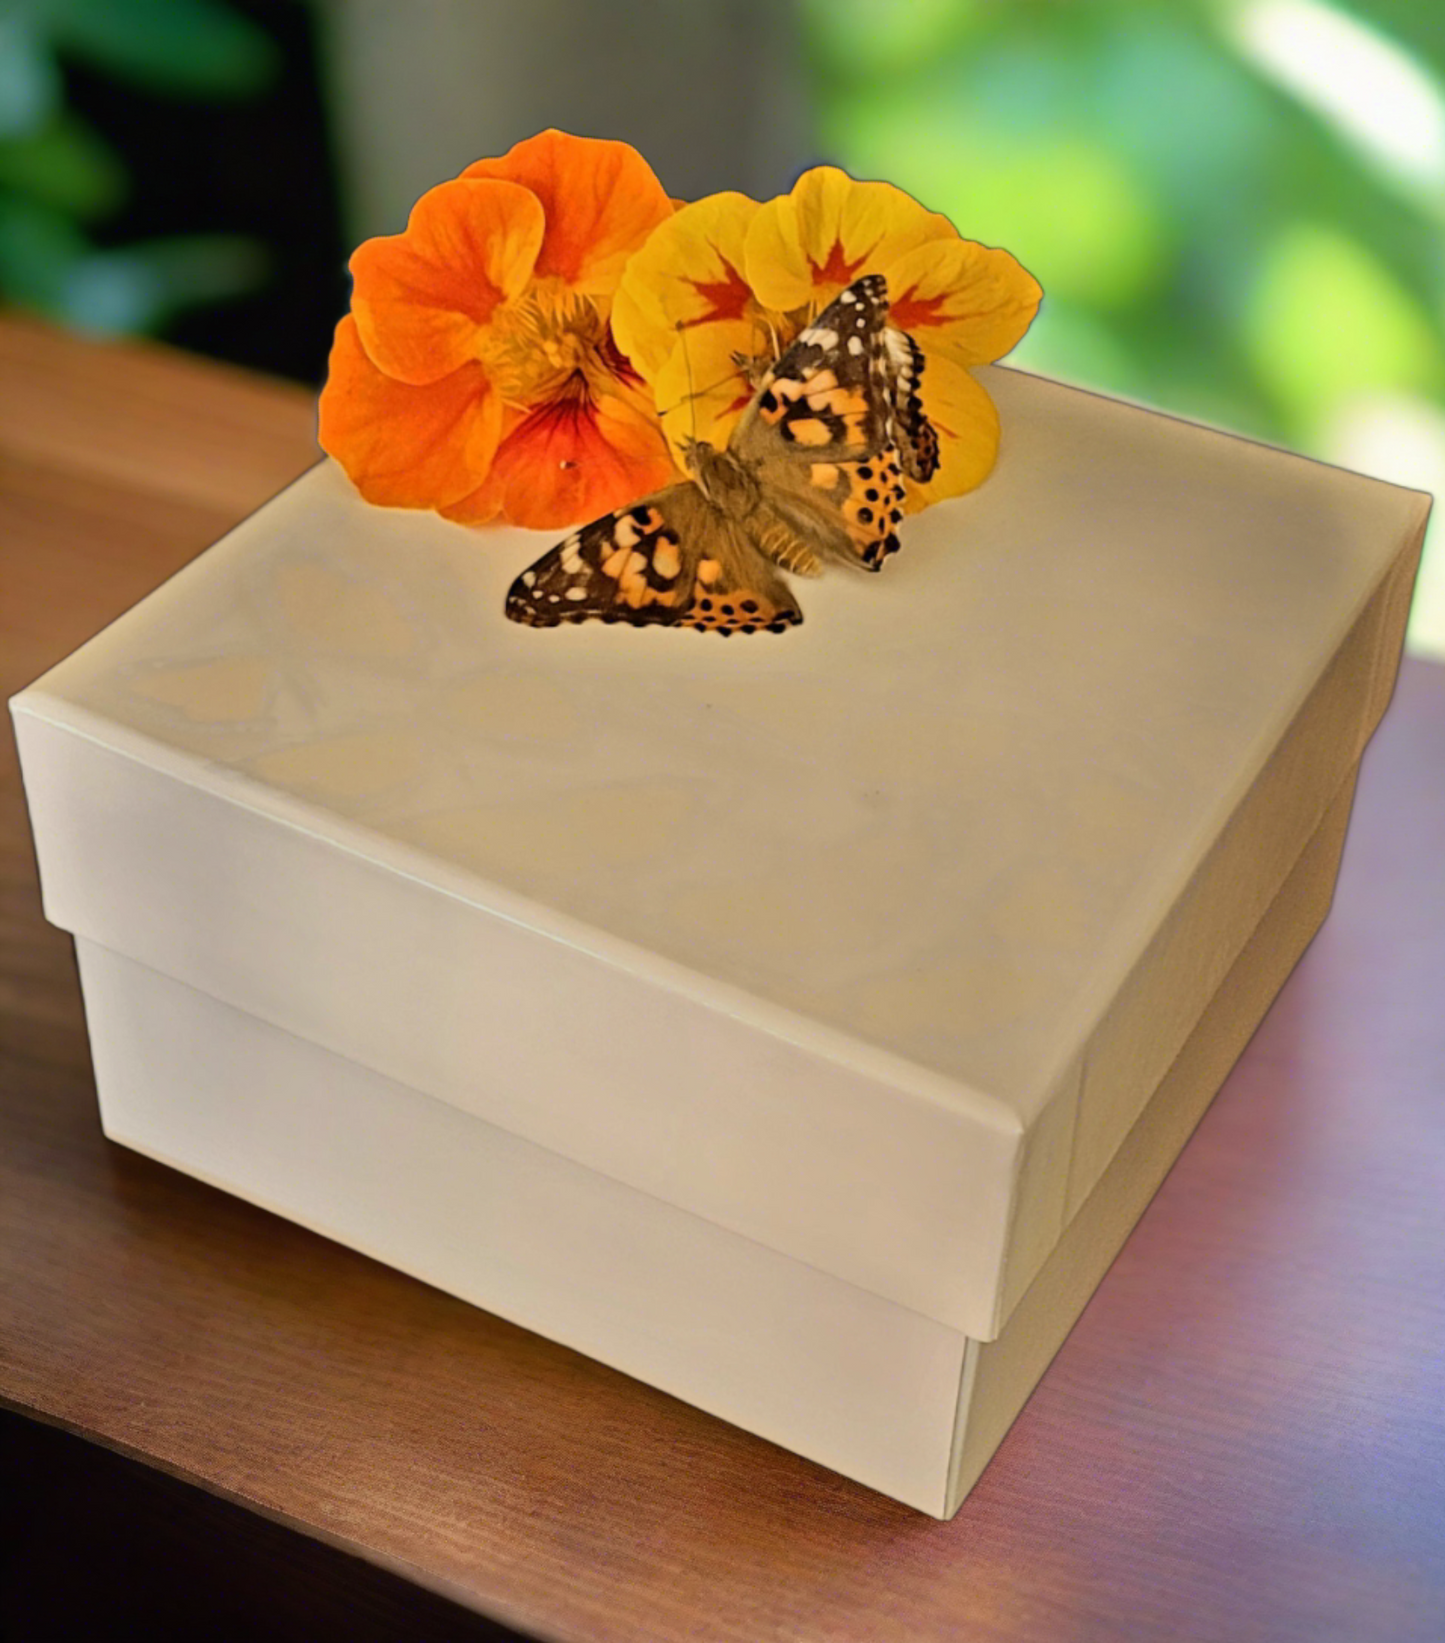 50 Painted Lady Butterflies in a Plain Mass Release Box ~ Please read IMPORTANT INFO BELOW before placing an order.